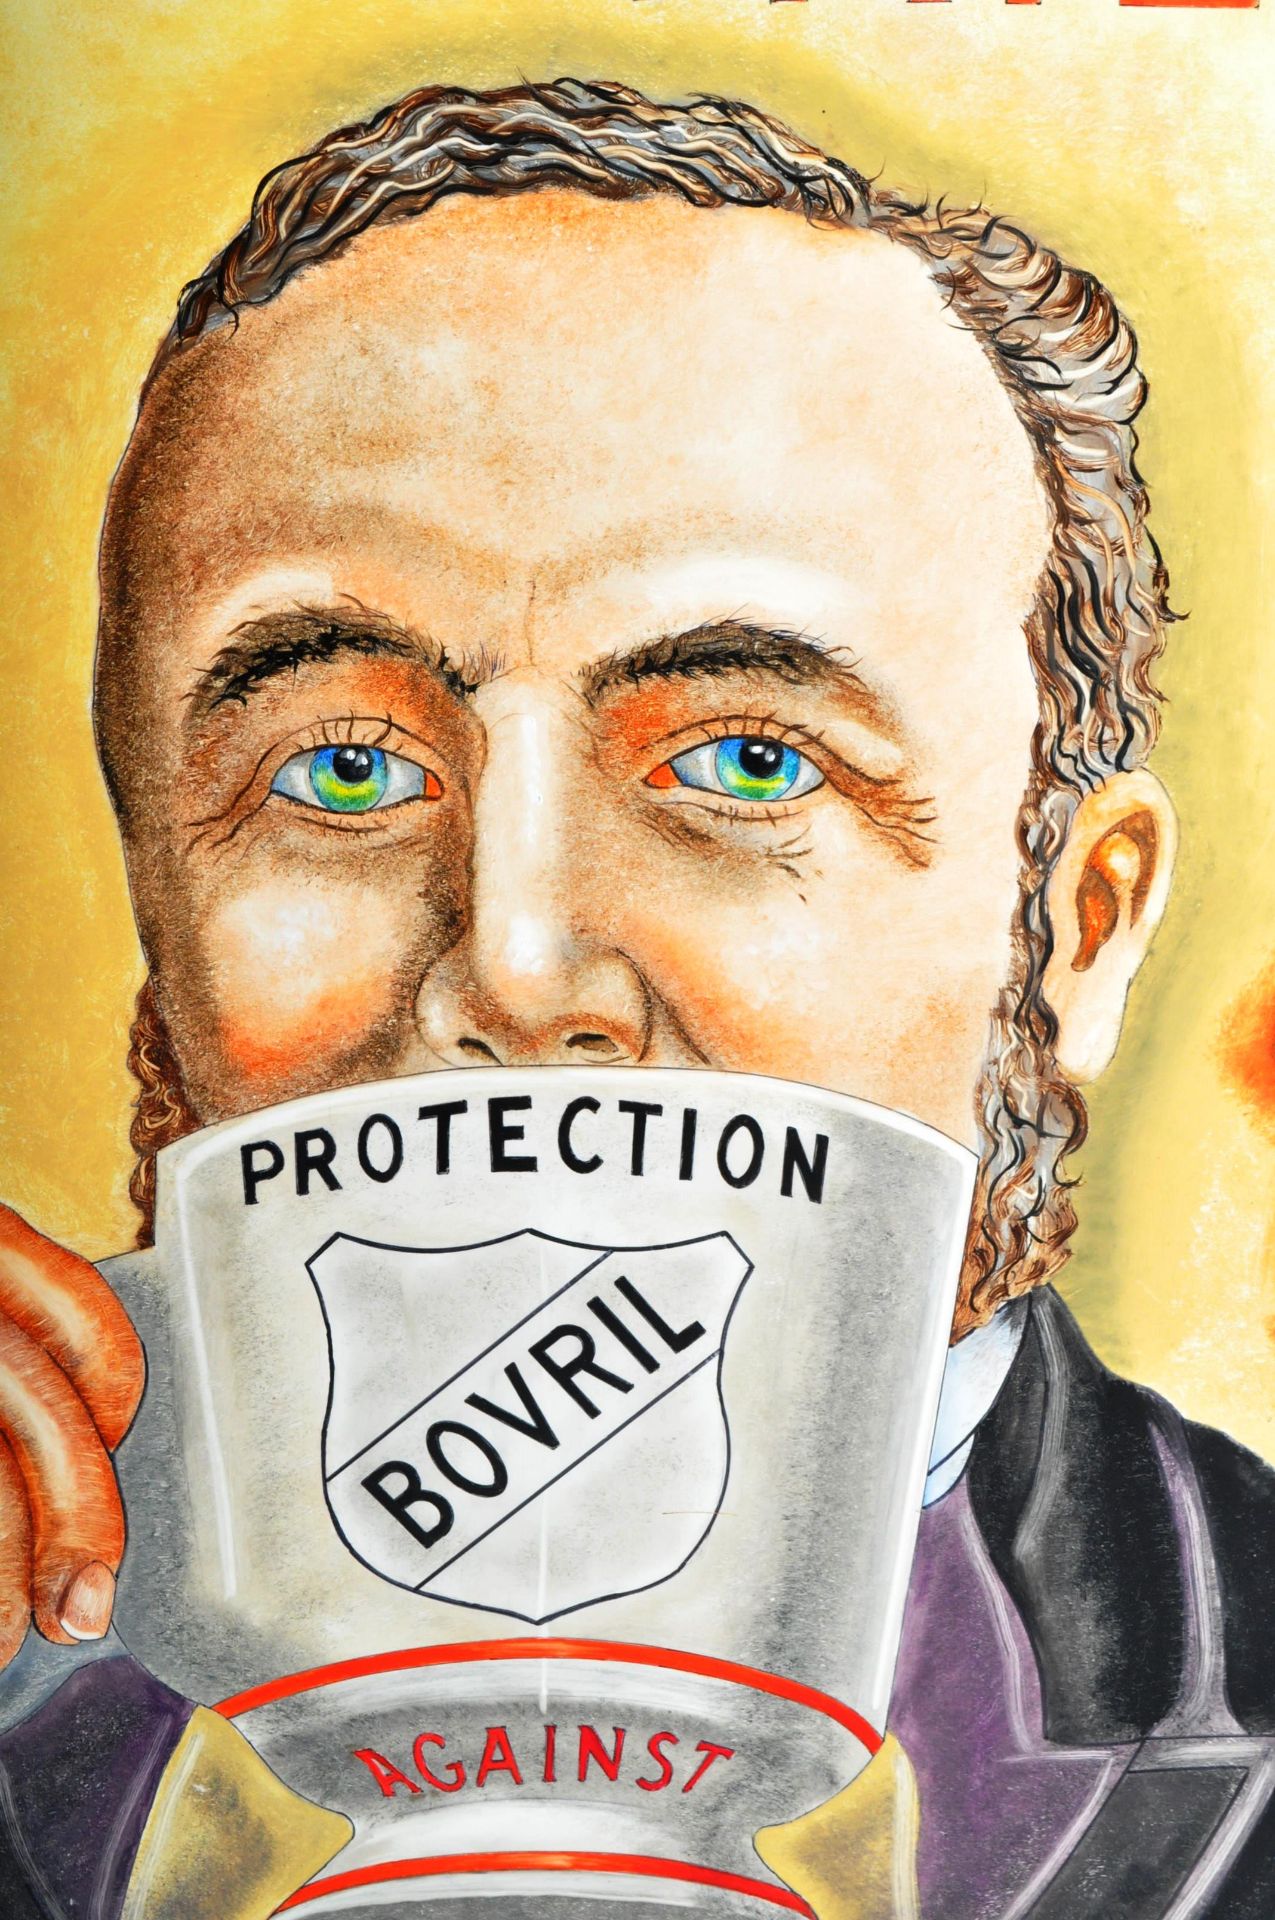 BOVRIL - CONTEMPORARY OIL ON BOARD ARTIST'S IMPRESSION SIGN - Image 3 of 4